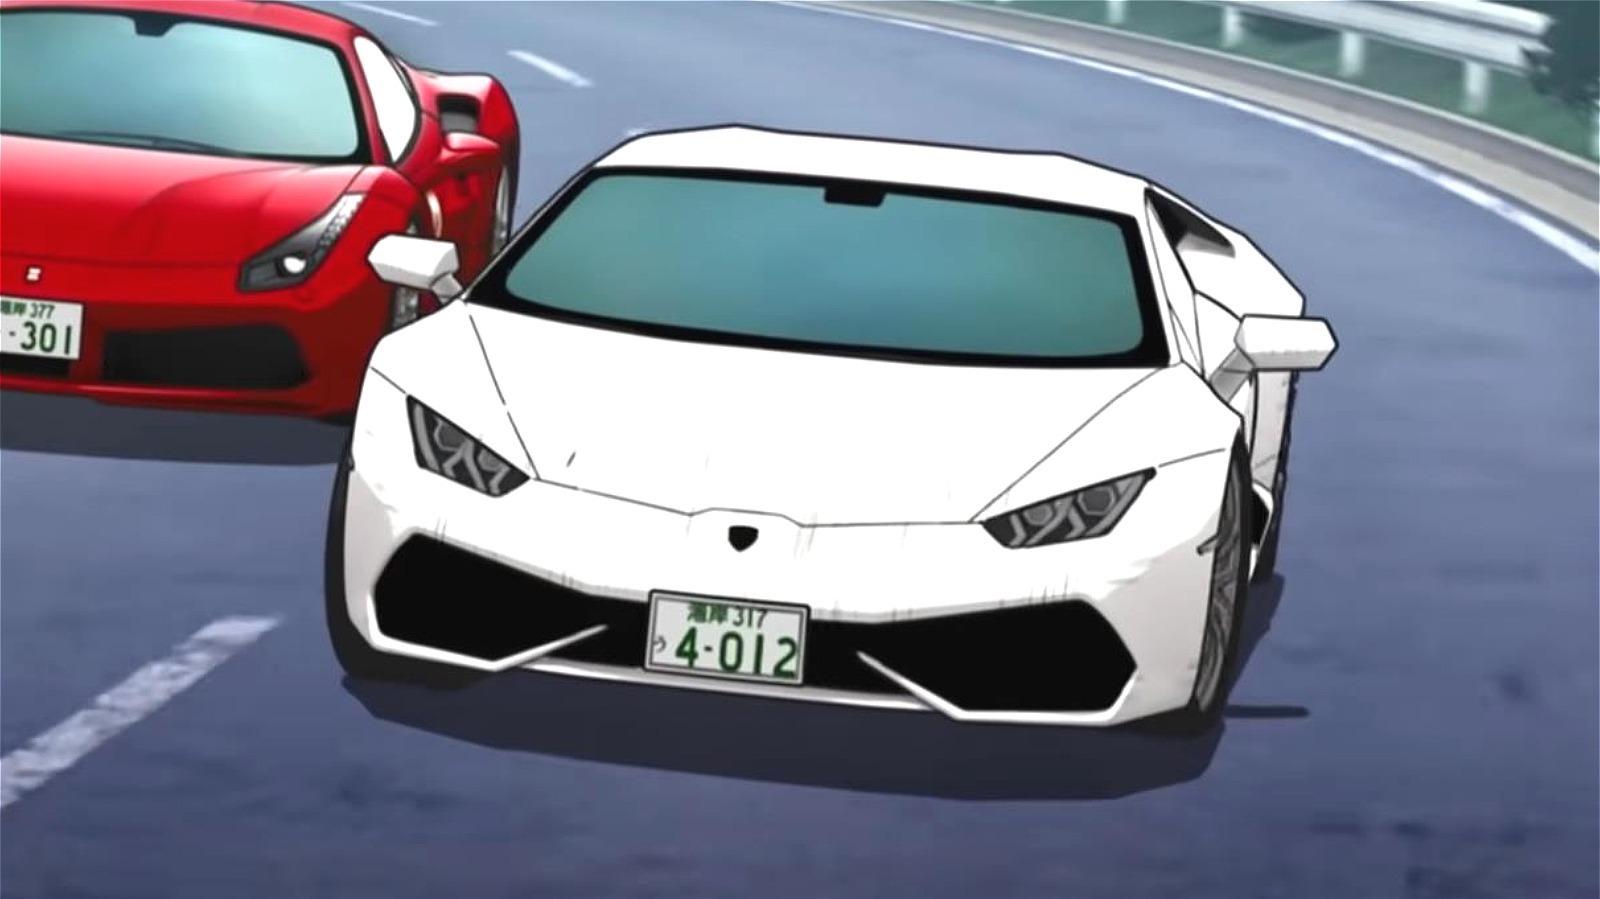 Eurobeat intensifies! Initial D sequel anime will stay the course with  dance music soundtrack【Vid】 | SoraNews24 -Japan News-